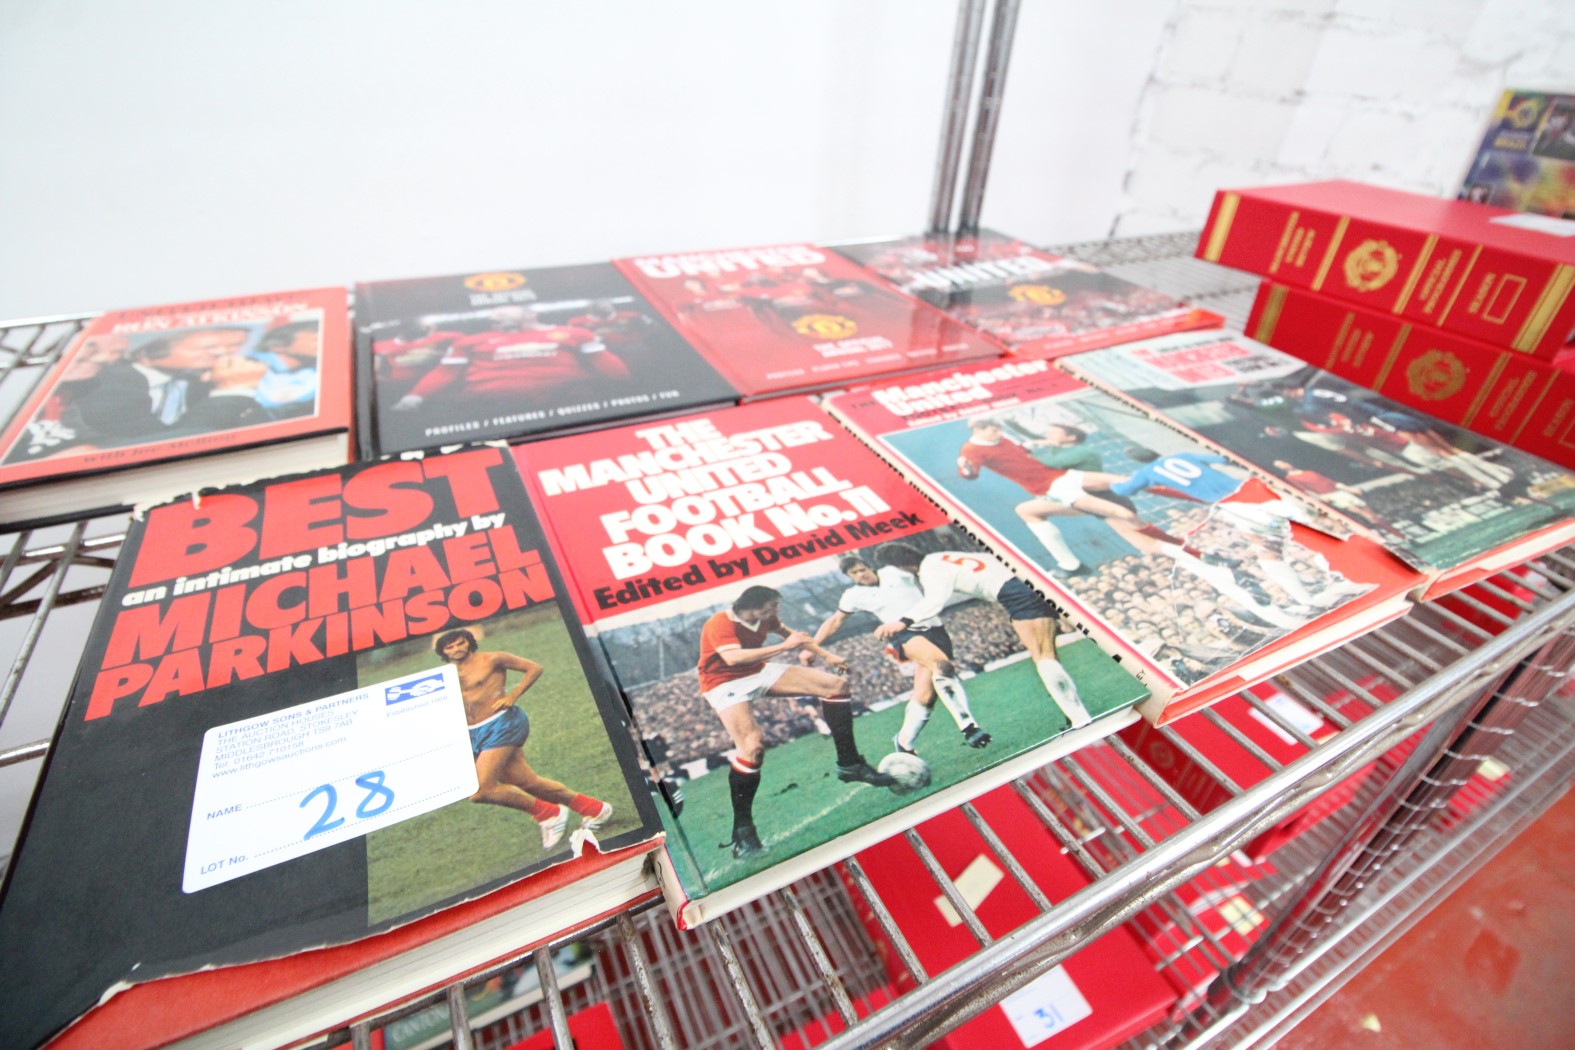 8x MANCHESTER UNITED HARDBACK BOOKS, INCLUDING 'UNITED TO WIN', 'OFFICIAL ANNUAL 2015', 'OFFICIAL